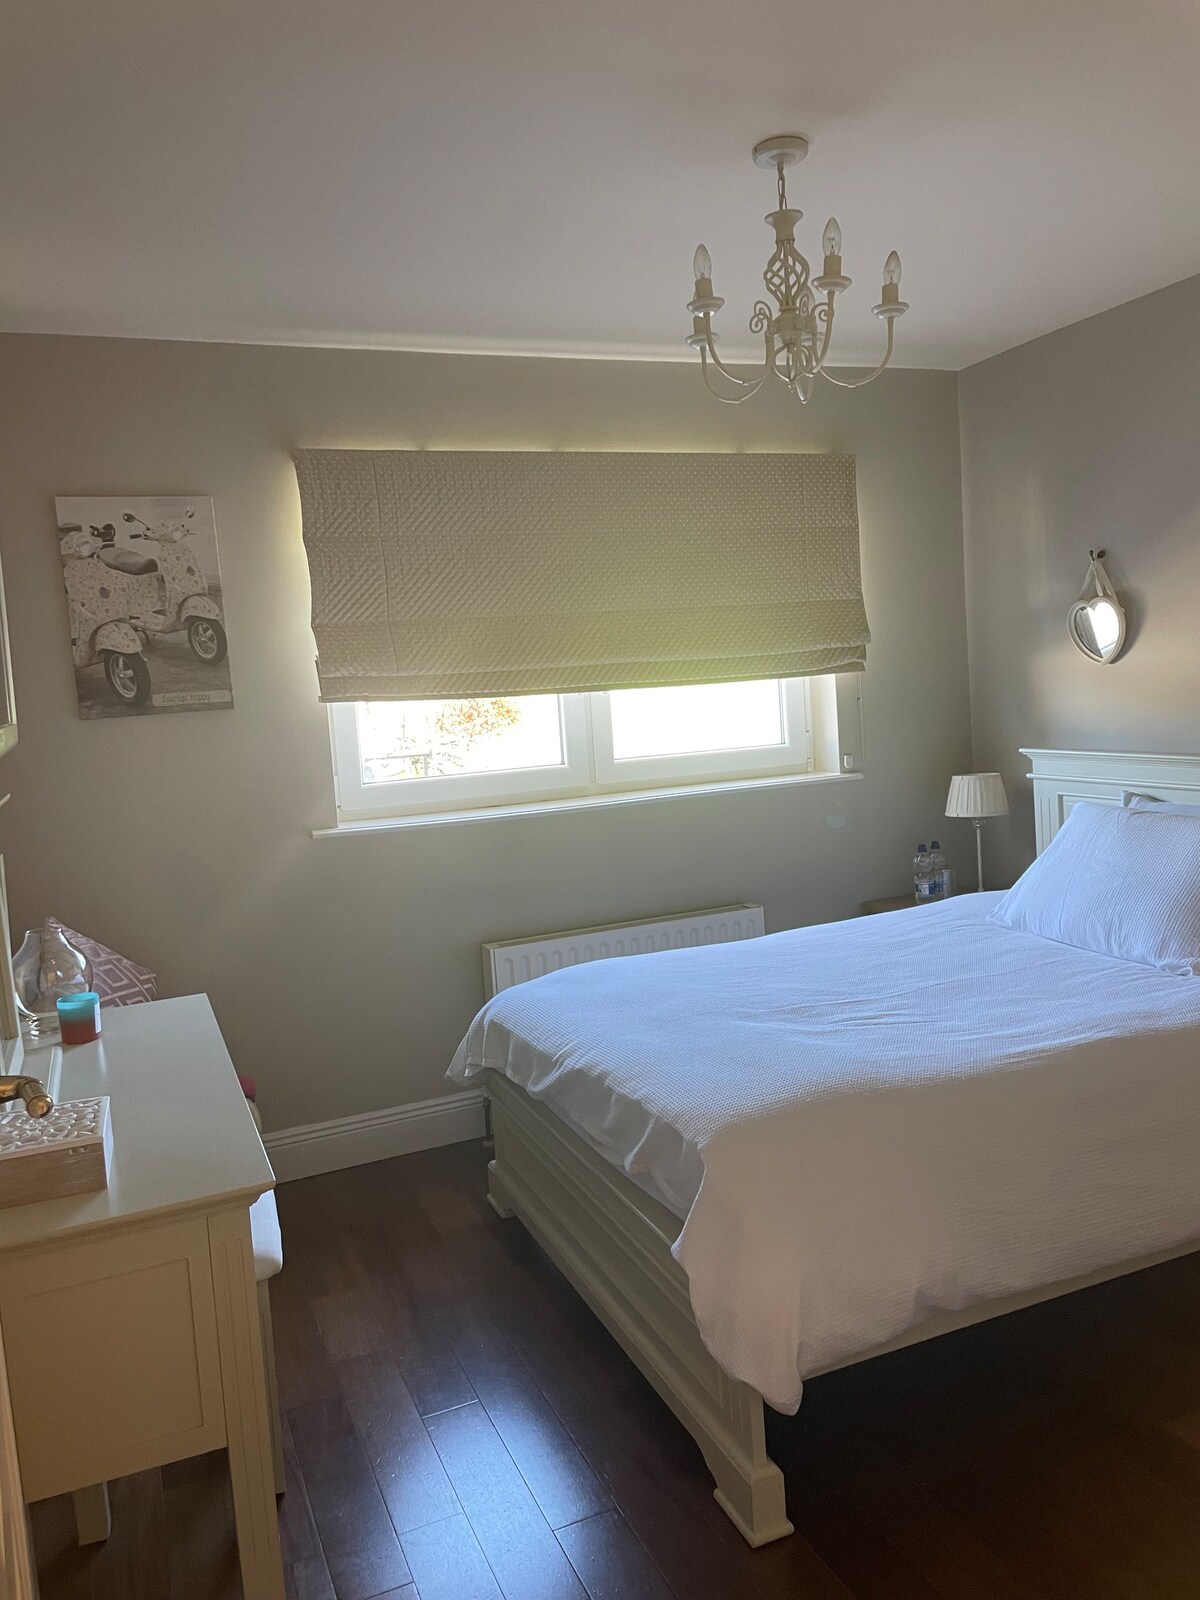 Small double room in Knockgreany, Coolgreany. 1pax